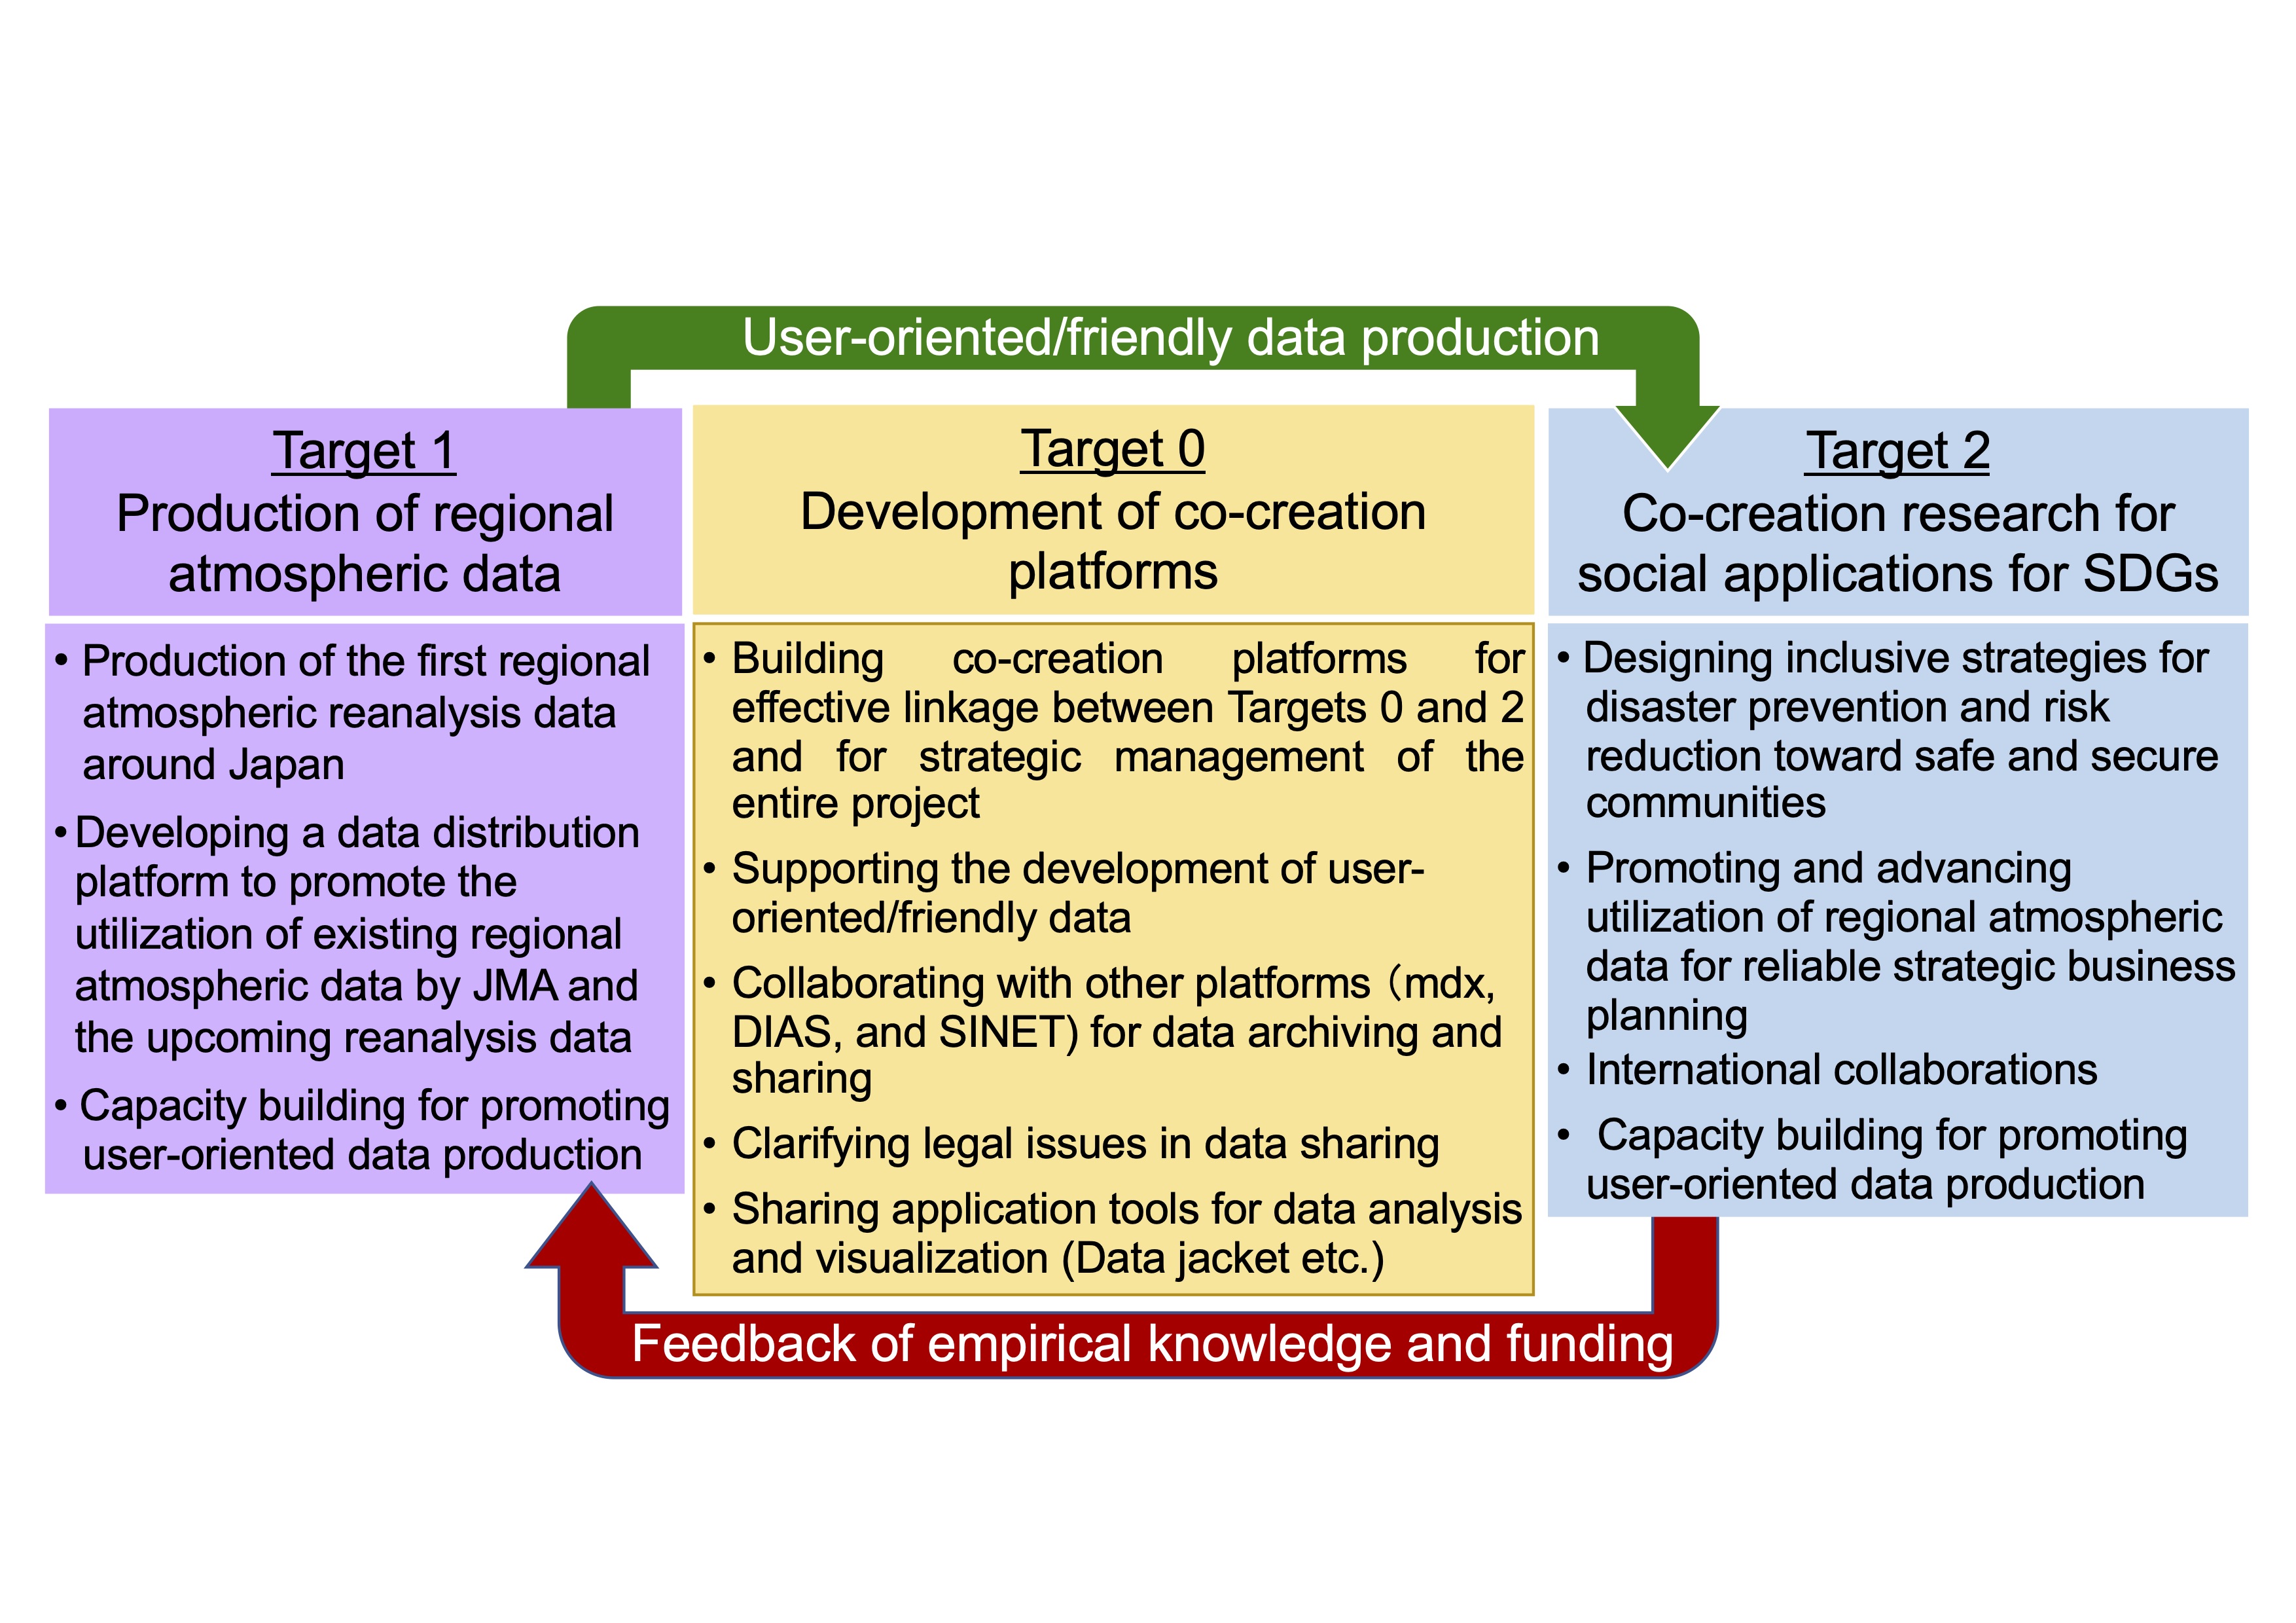 Development of useful regional meteorological/climate data and its utilization in society